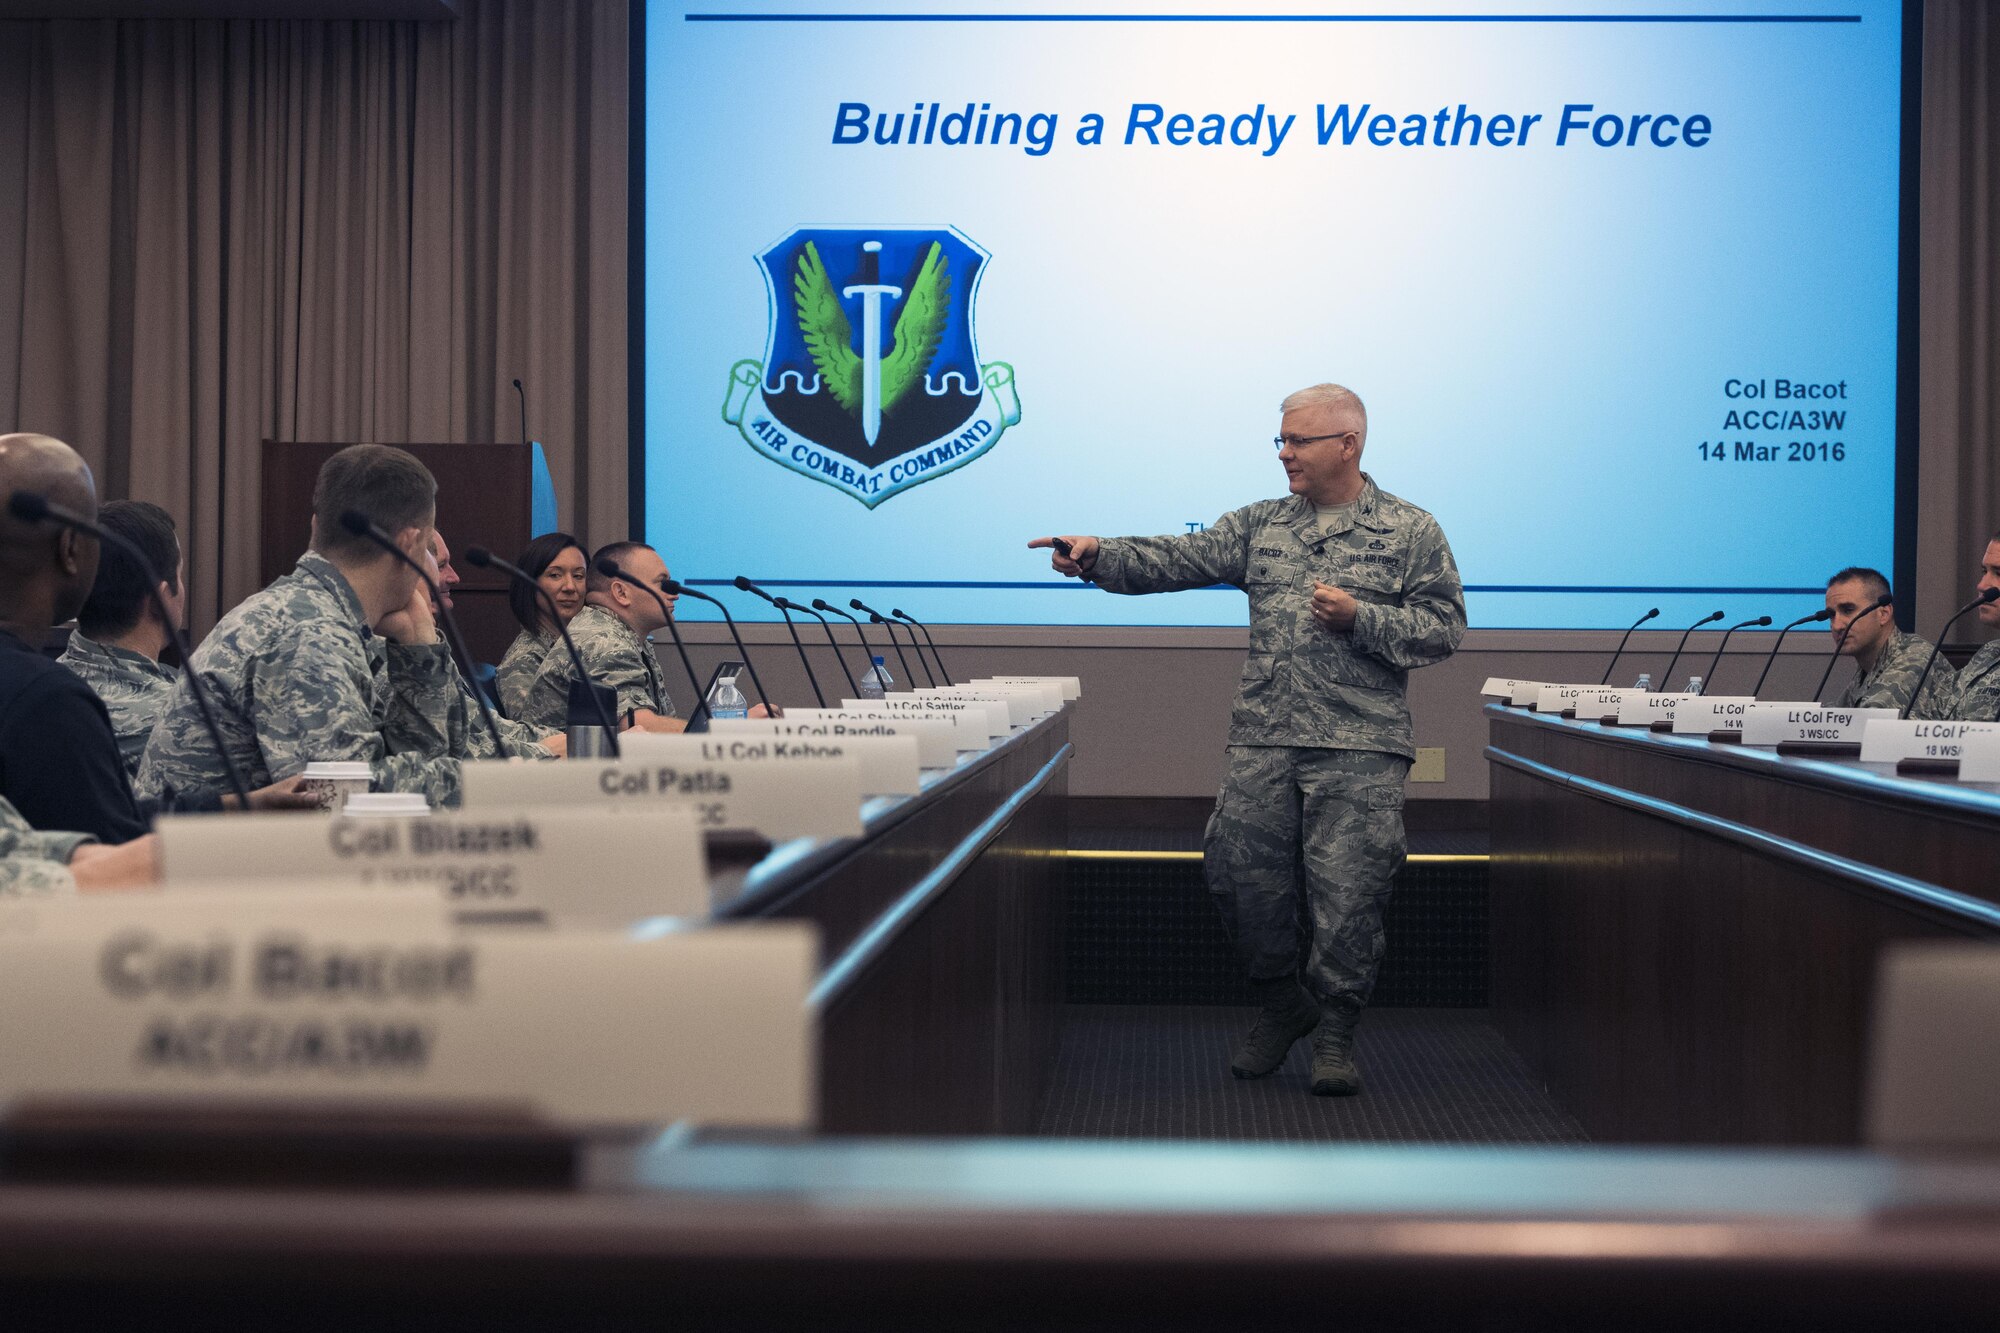 Col. David Bacot, Air Combat Command chief of weather operations, speaks during an annual weather conference at Joint Base Langley-Eustis, March 13, 2017. The purpose of the conference was to shape the future of the weather force by discussing topics that affect the worldwide areas in the Air Force. Additionally, it gave leaders an opportunity to brainstorm solutions to rising concerns in the career field. (U.S. Air Force photo by Staff Sgt. Nick Wilson)